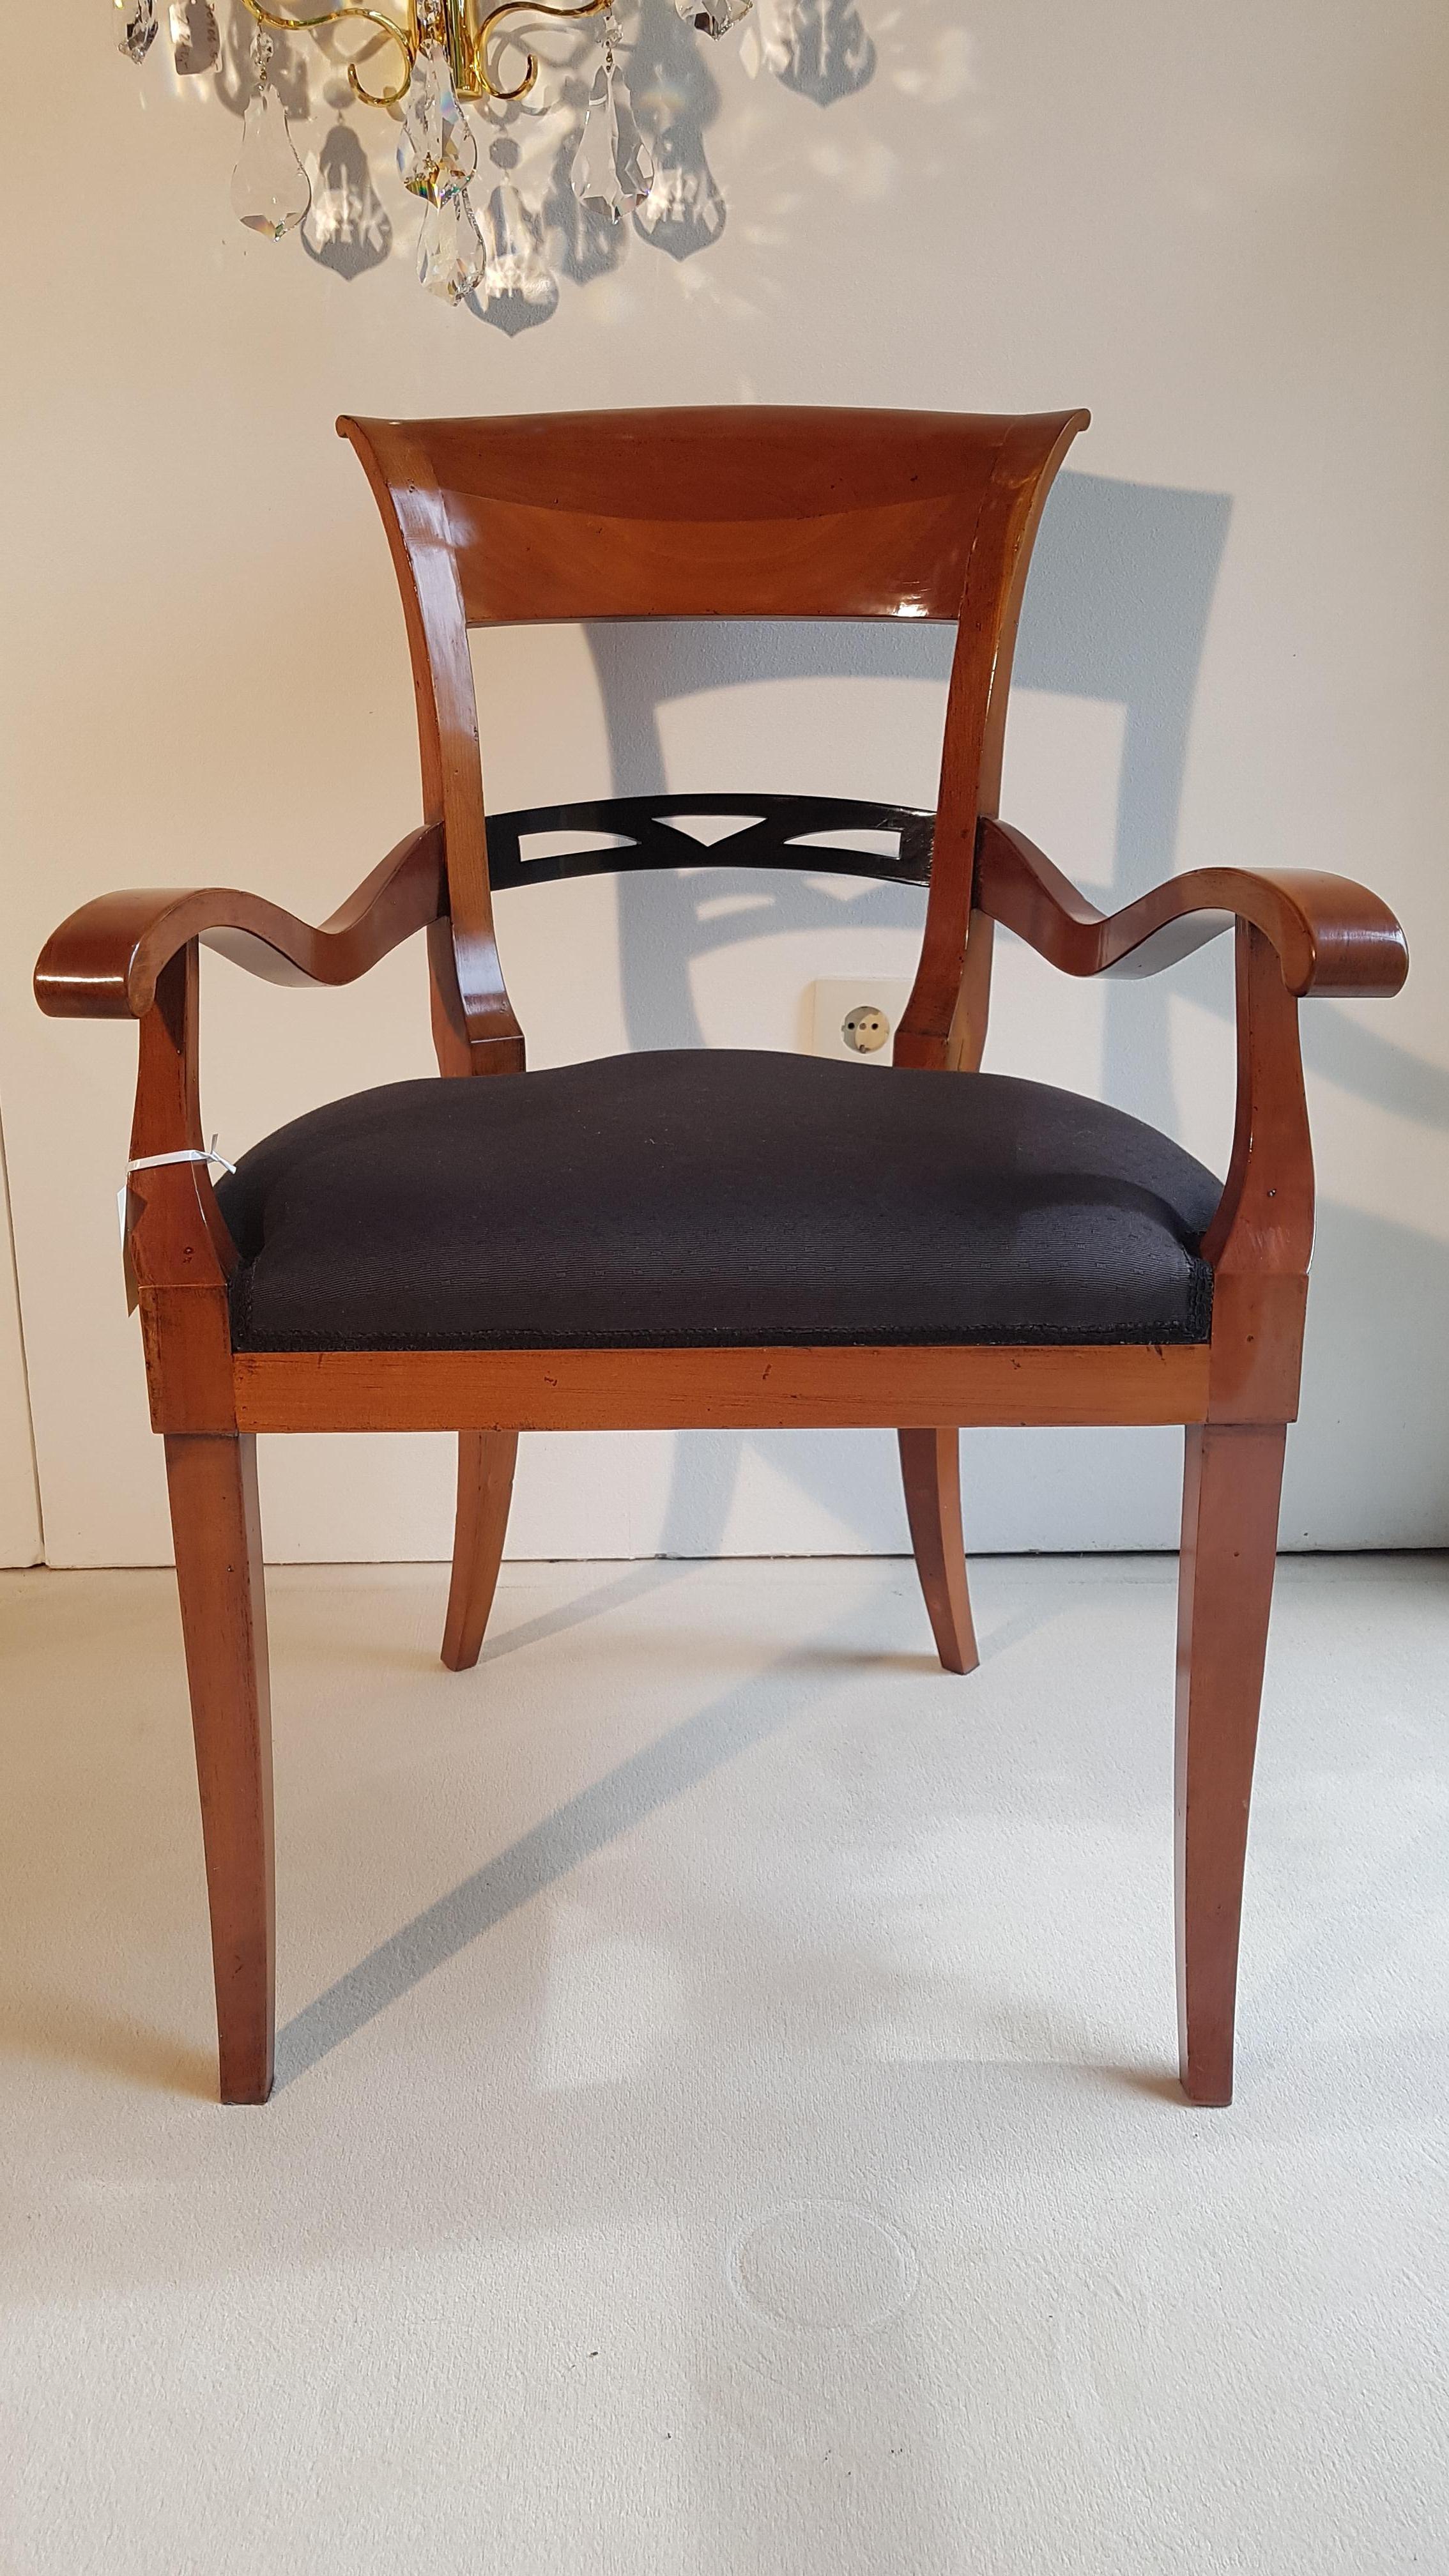 19th Century Biedermeier Chair with Armrest Made of Cherry For Sale